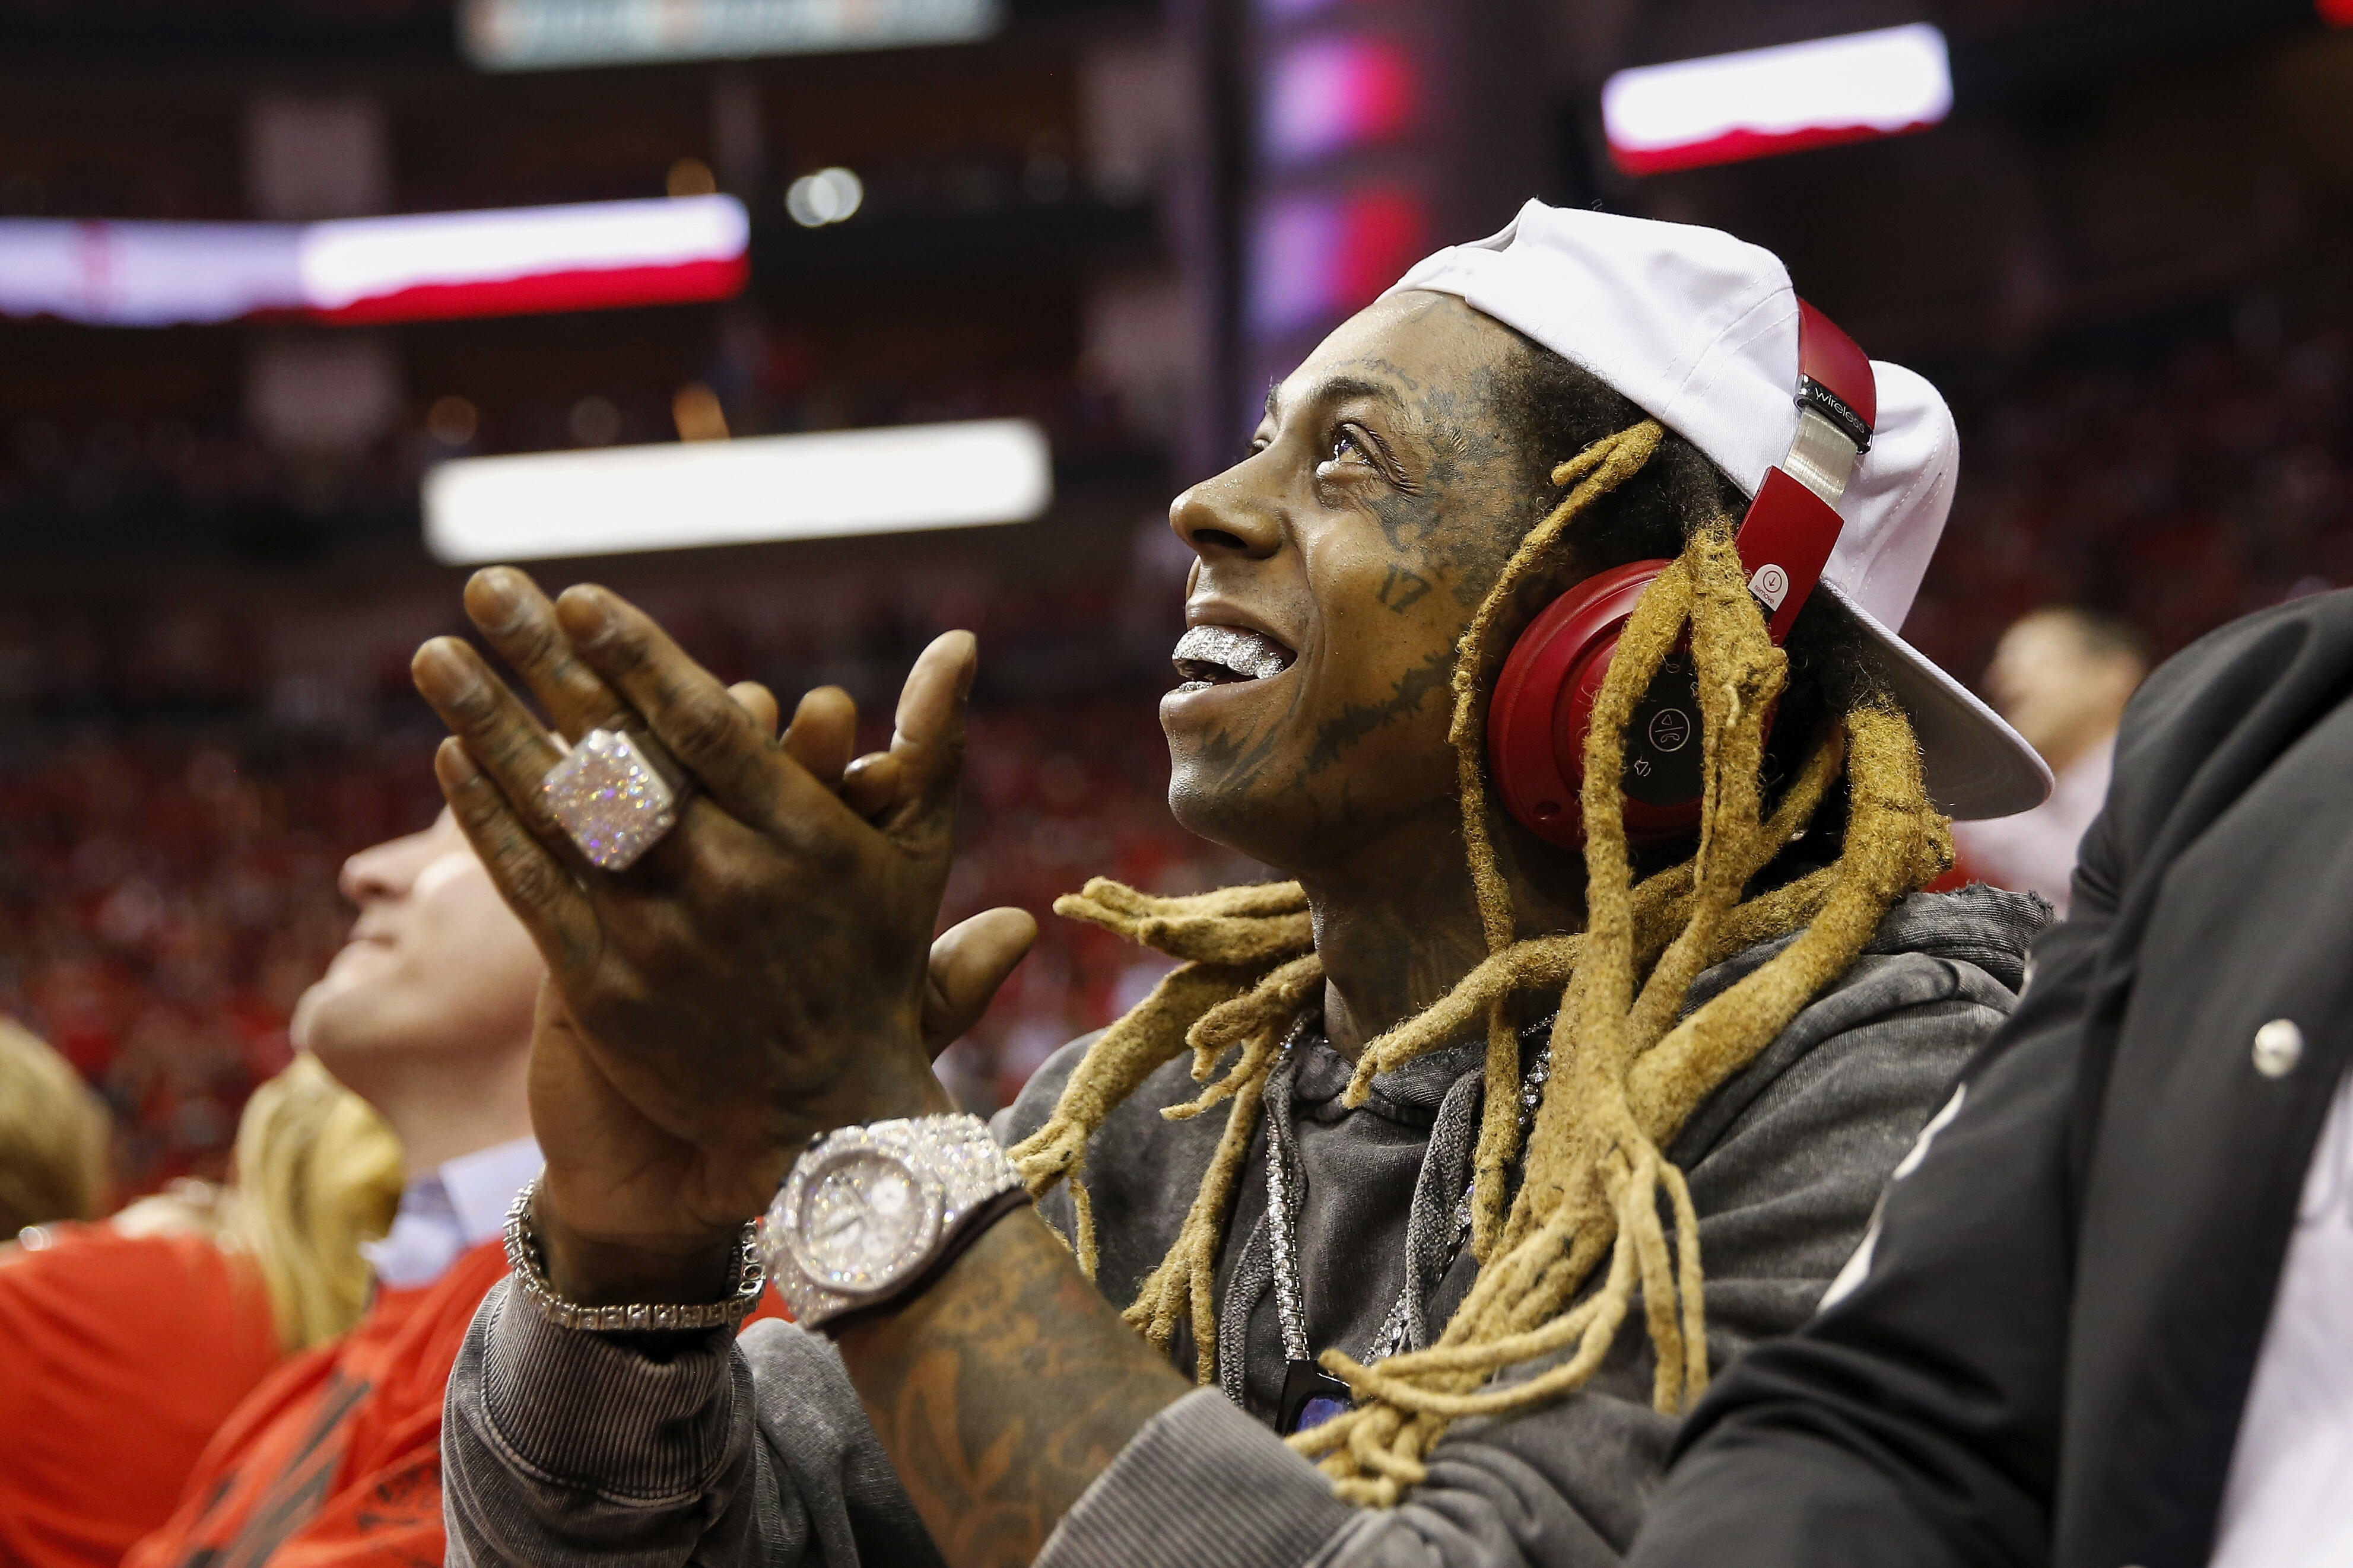 Want To Own Lil Wayne's Lyrics? Now Is Your Chance ...